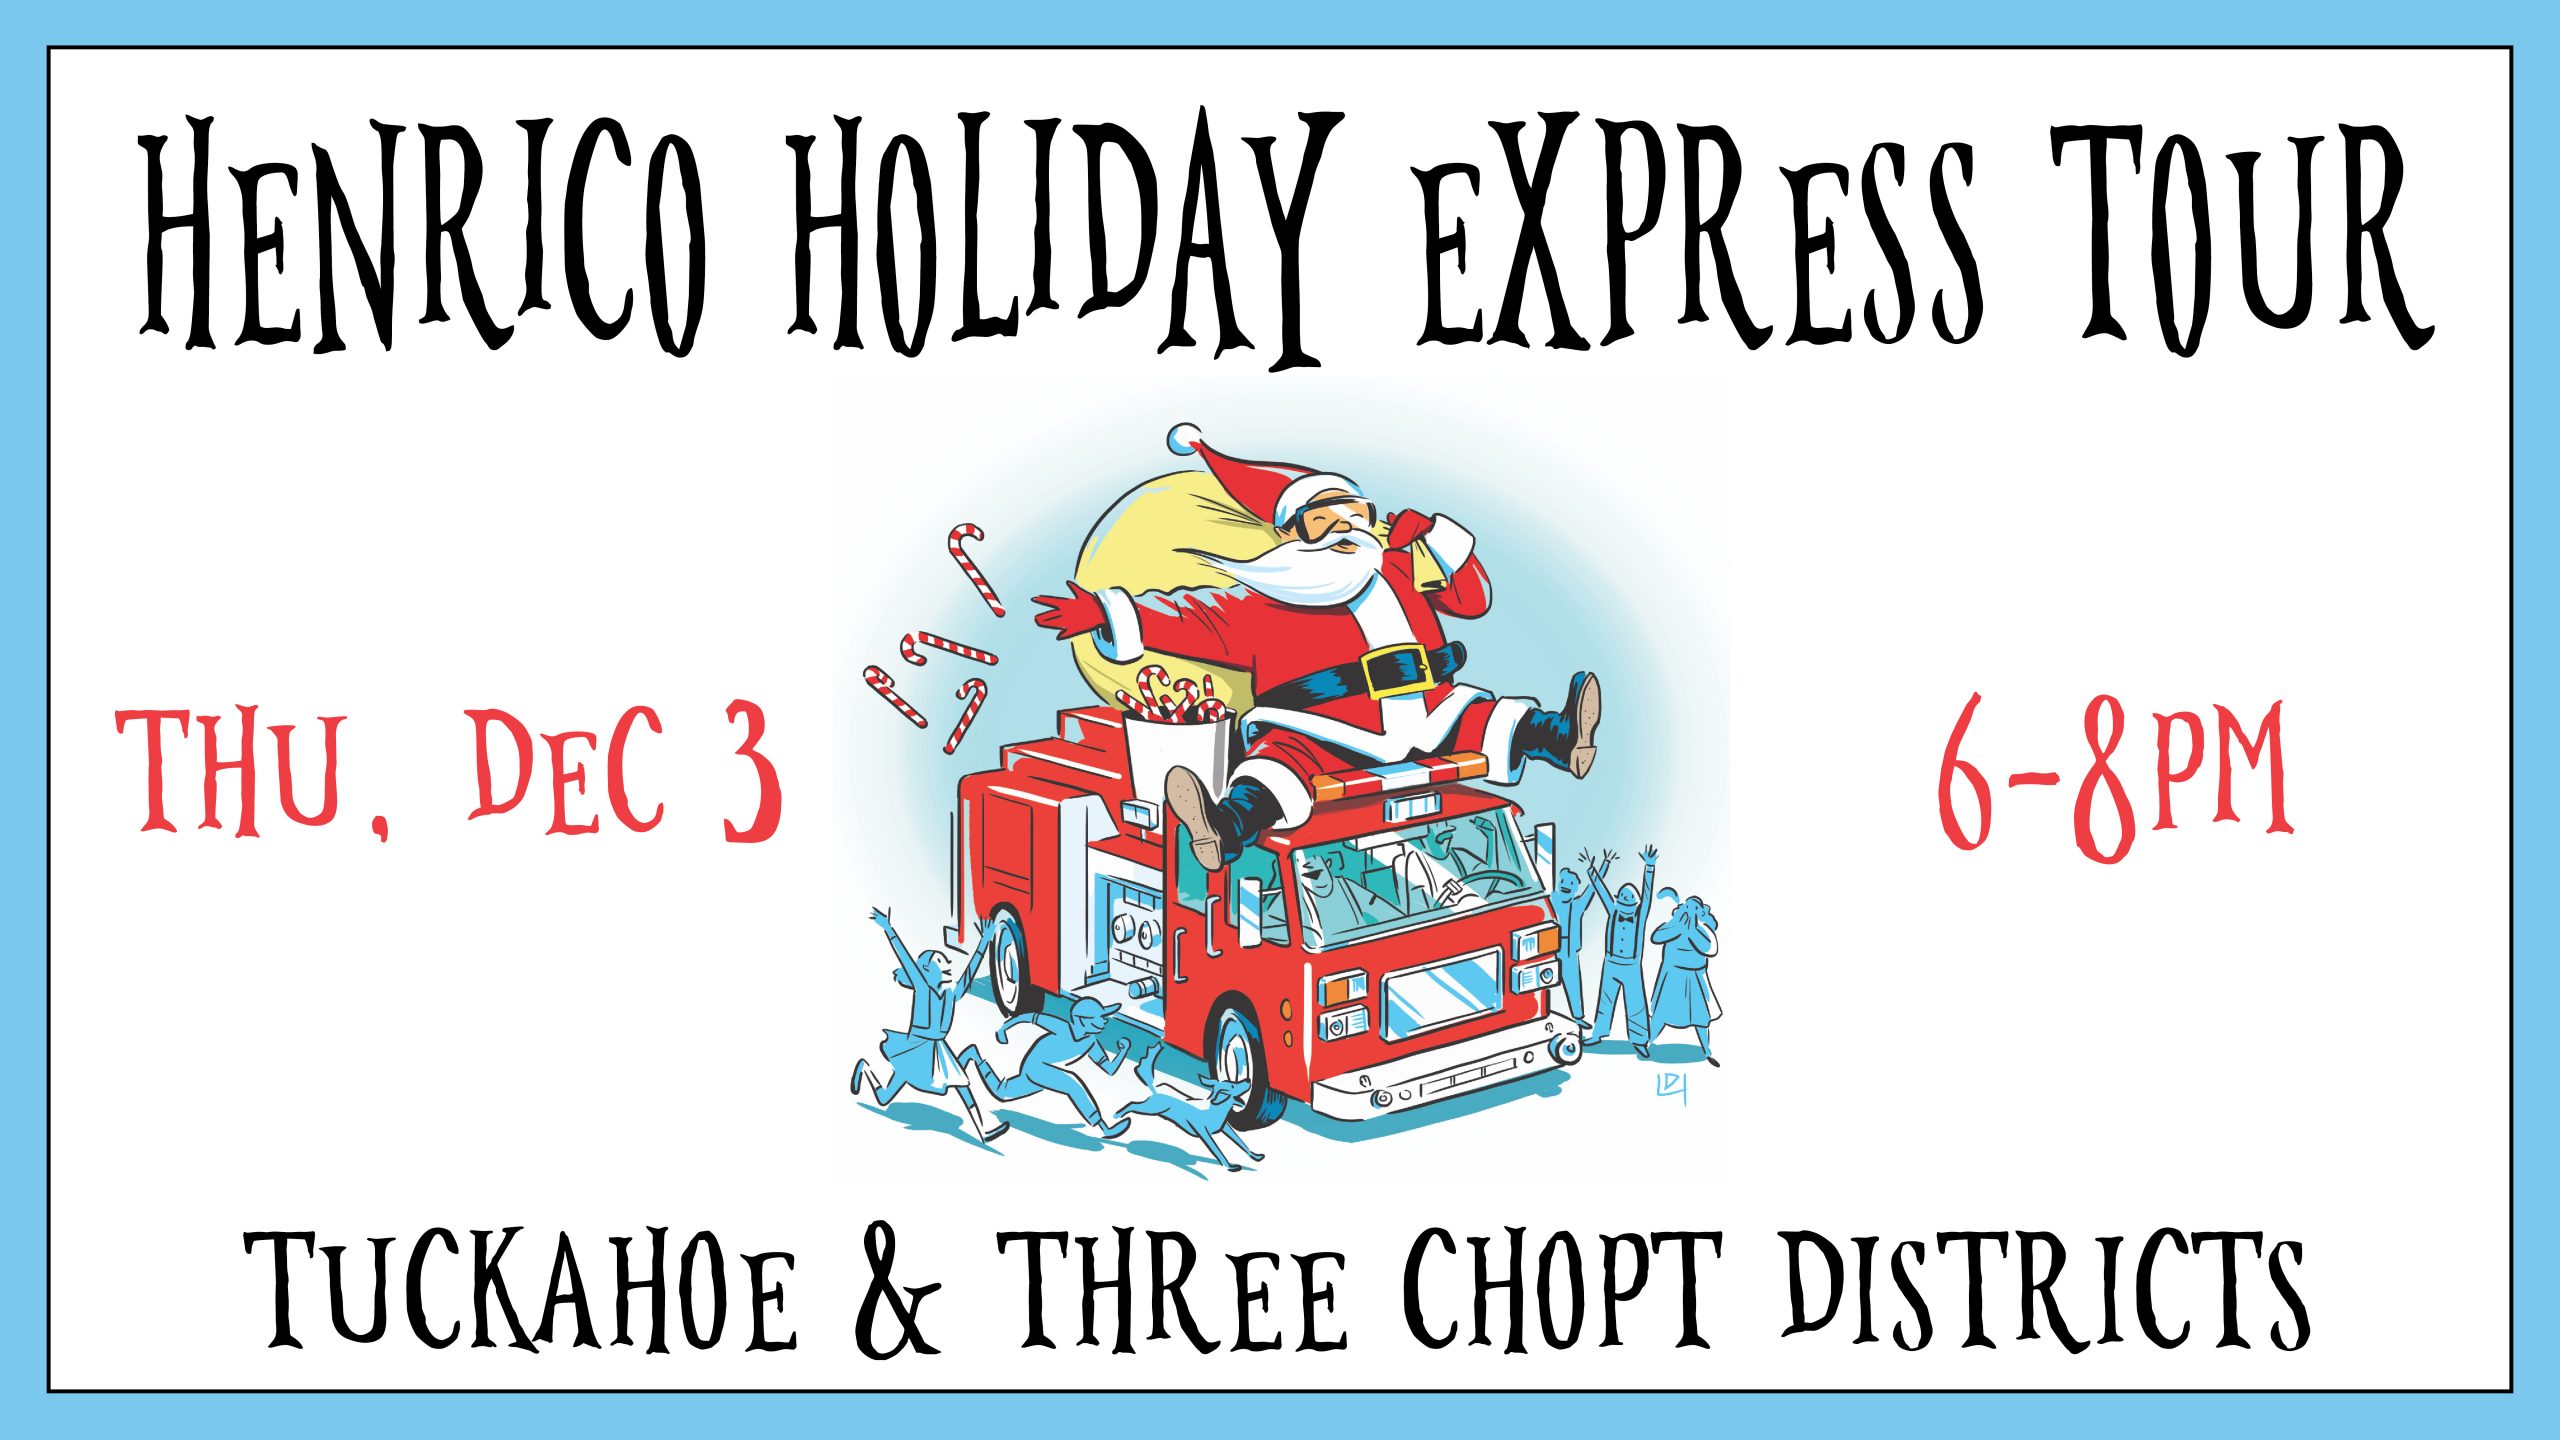 Holiday Express Tour Fb Images Tuckahoe 3 Chopt